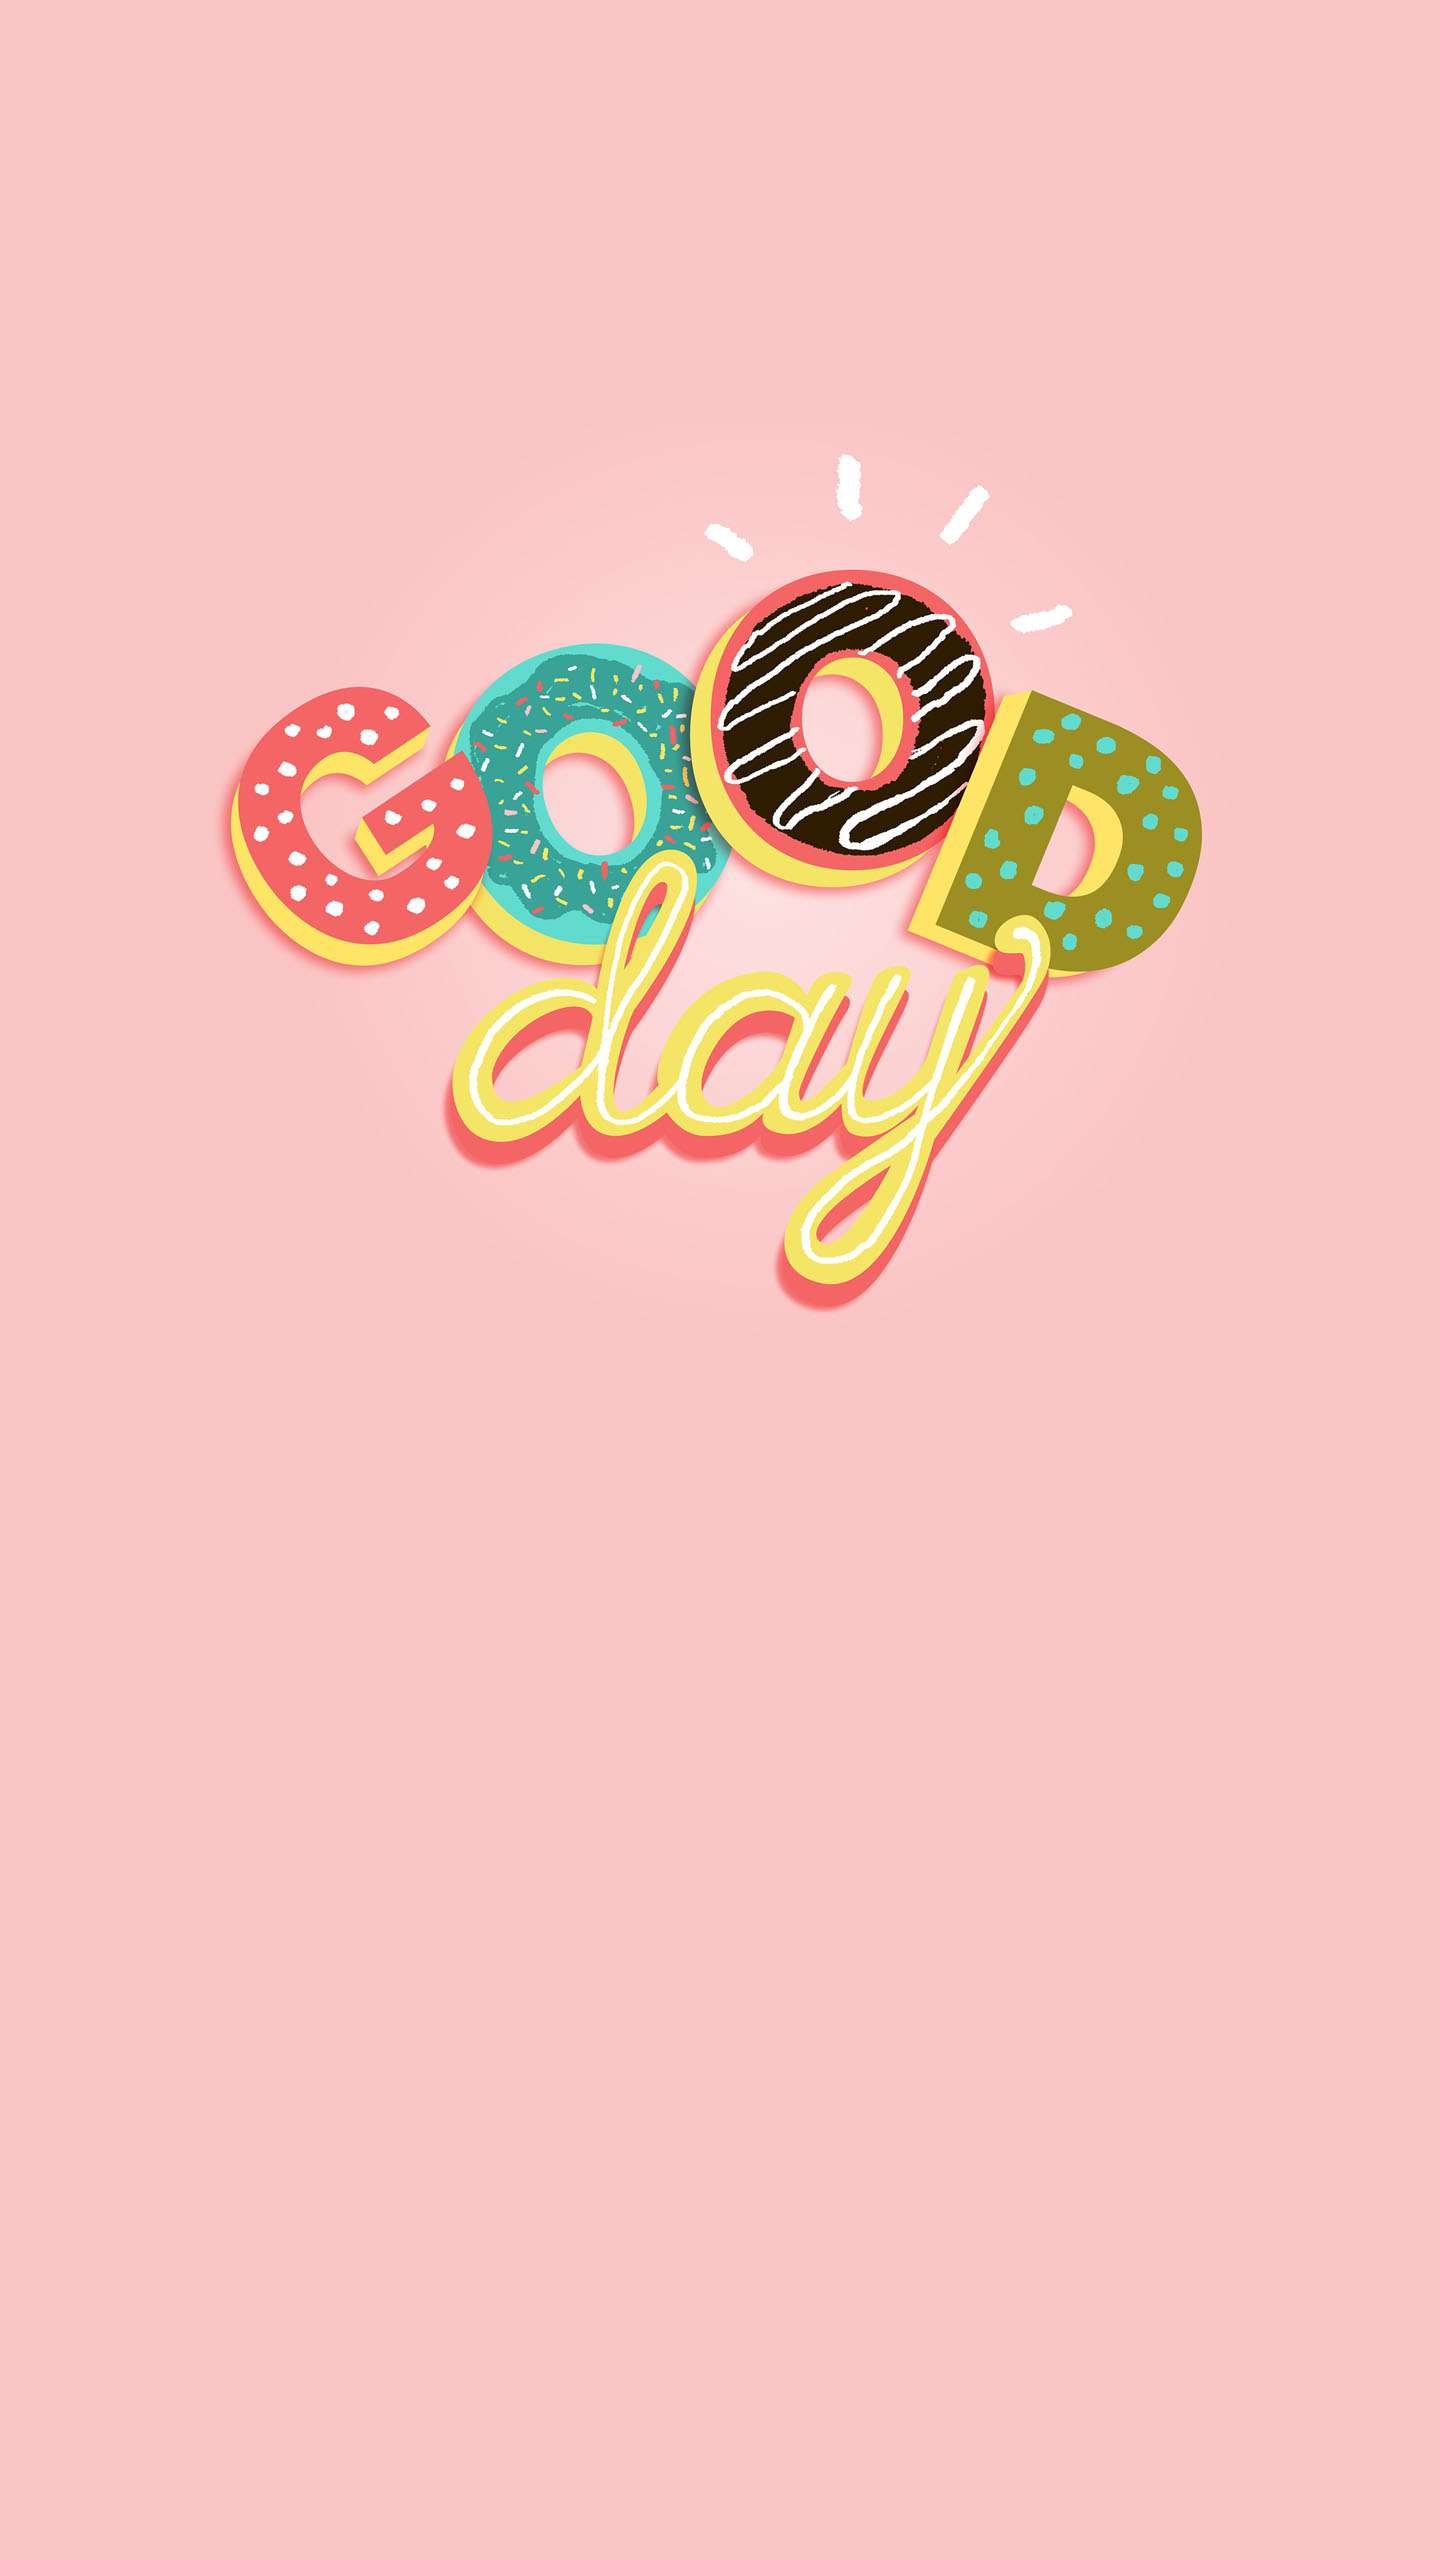 Good Day IPhone Wallpaper - IPhone Wallpapers : iPhone Wallpapers